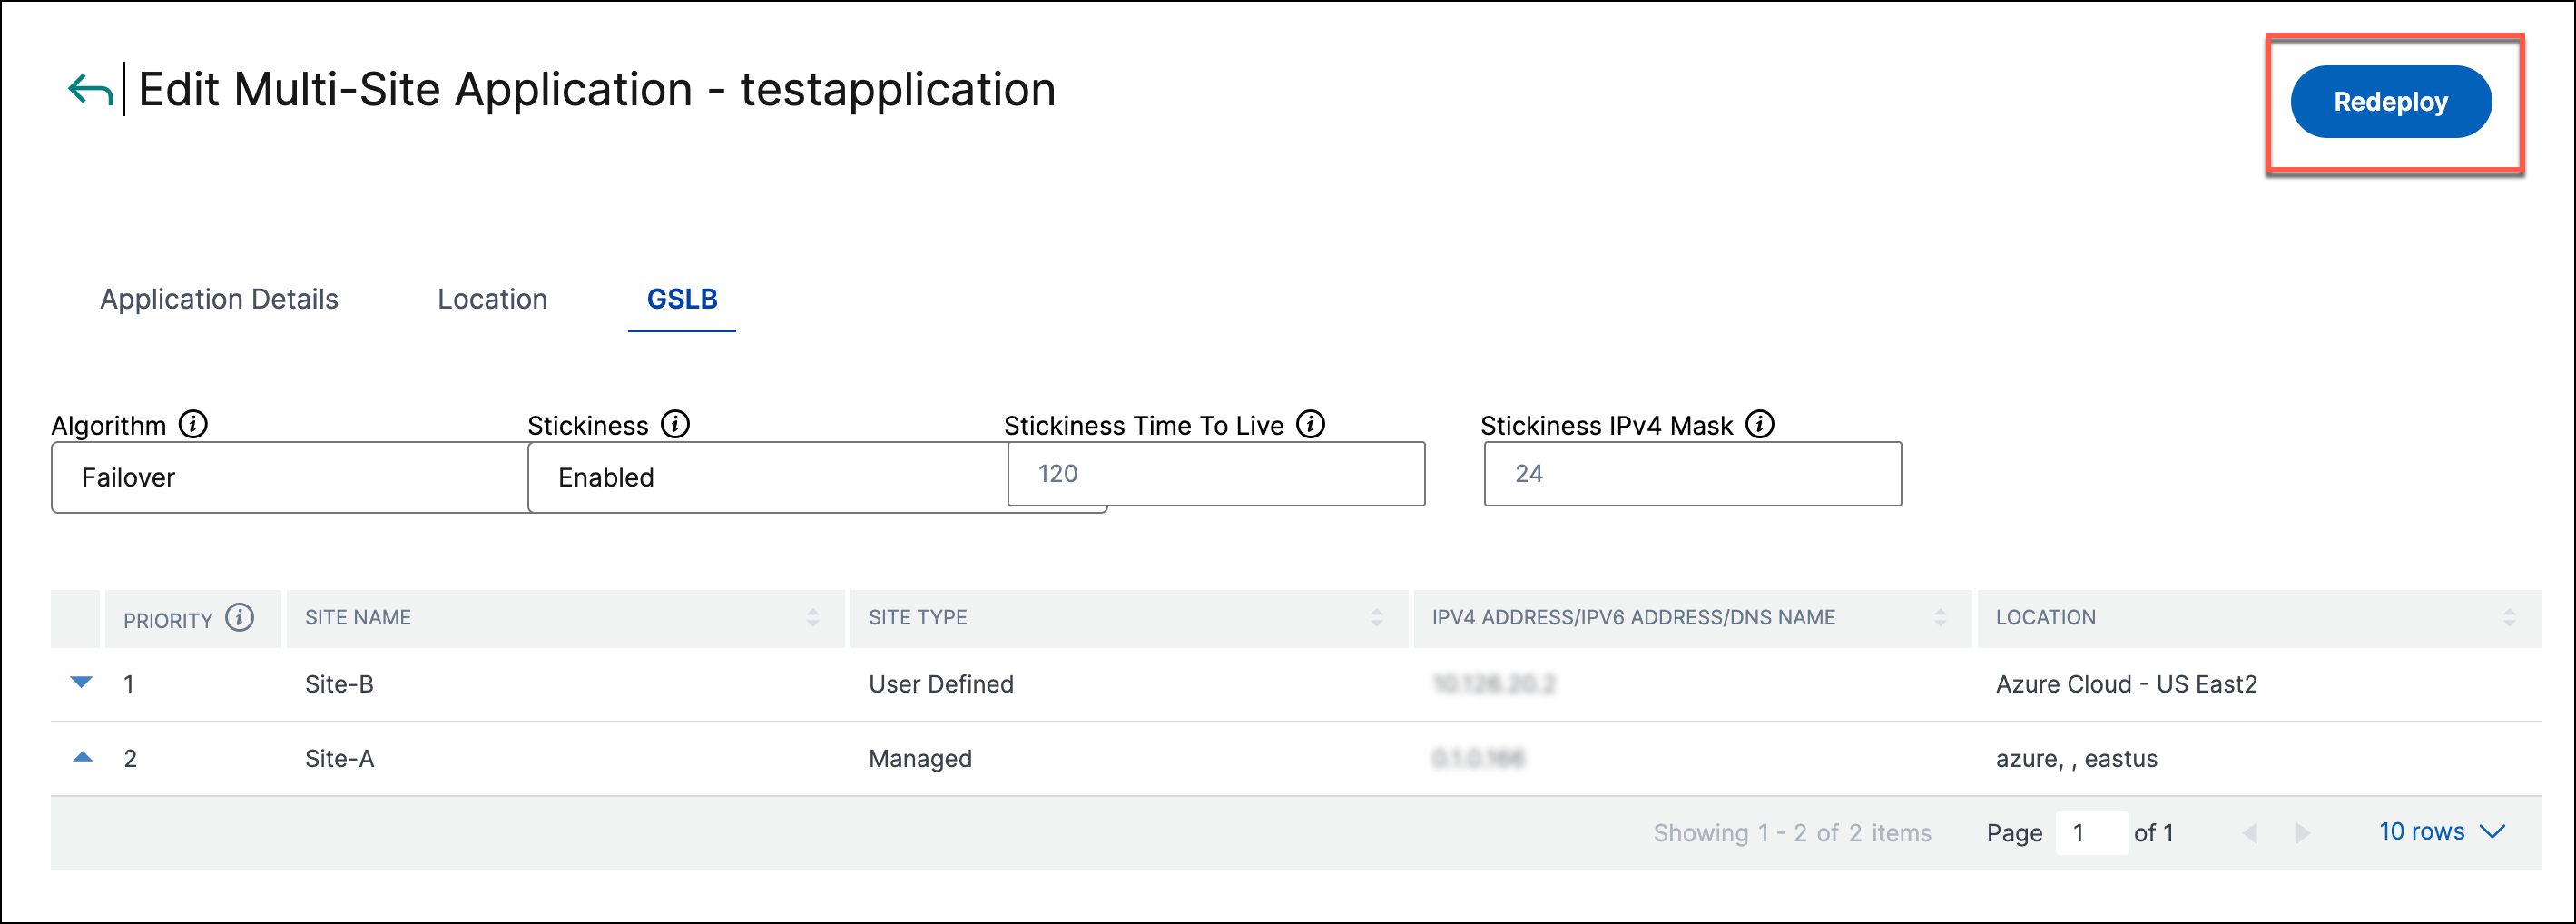 Modify and redeploy a multi-site application